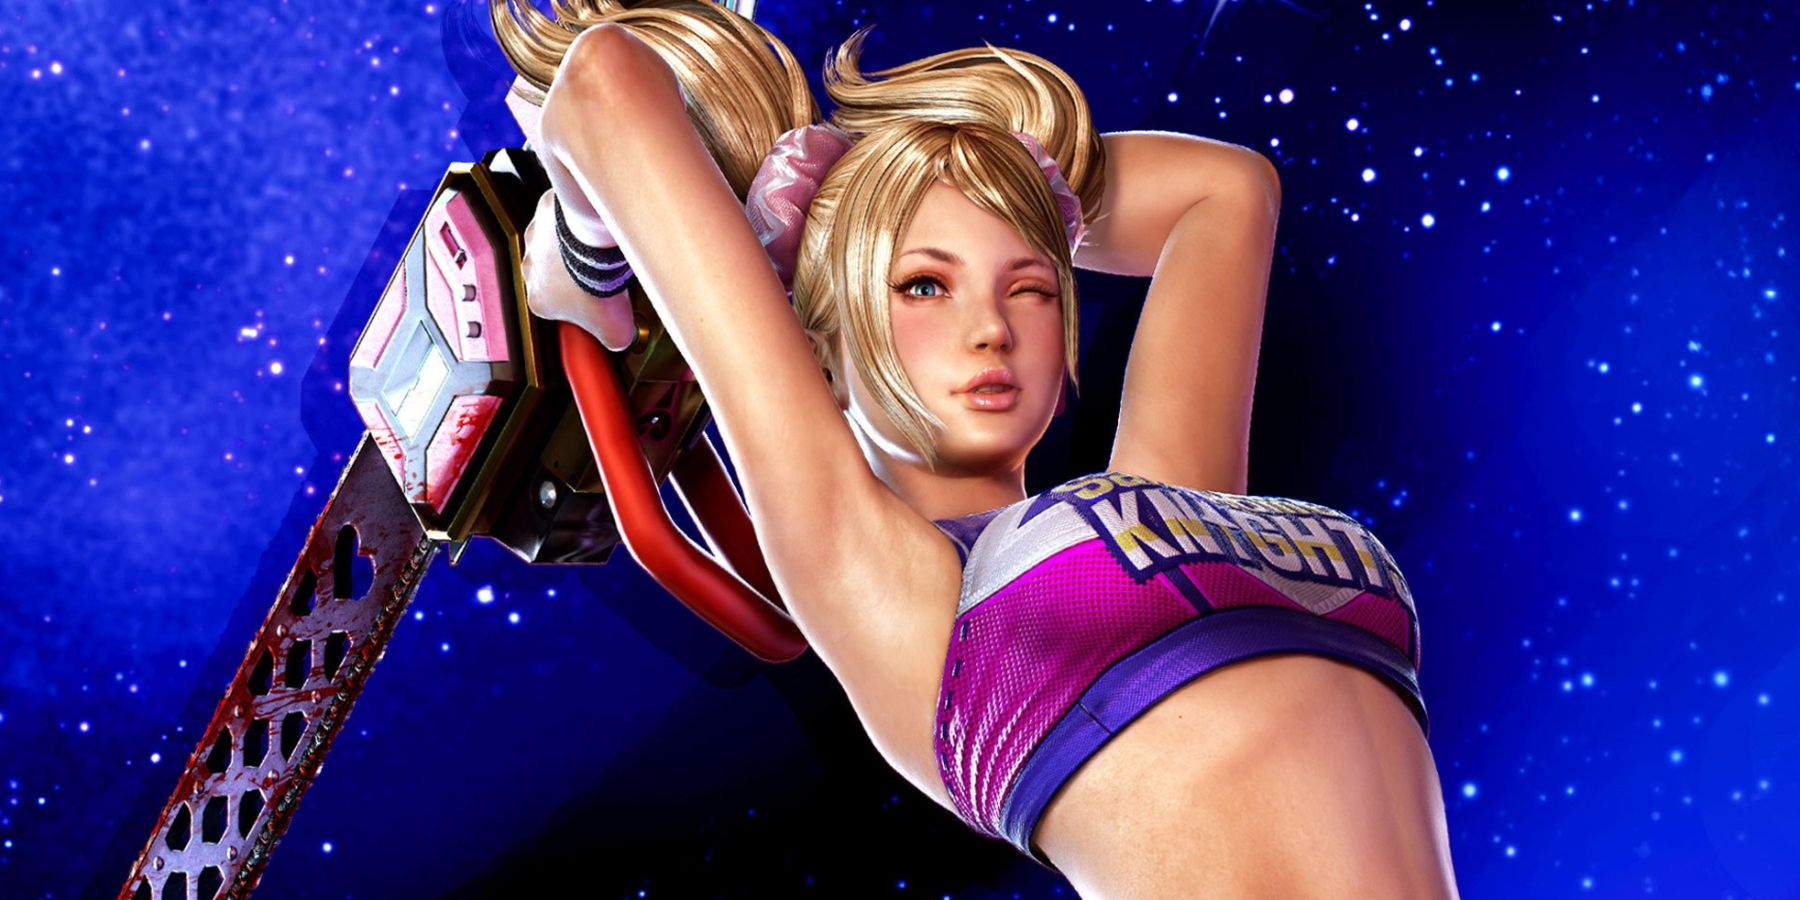 Lollipop Chainsaw's remake will already be worse than the original, since it won't feature the same soundtrack.